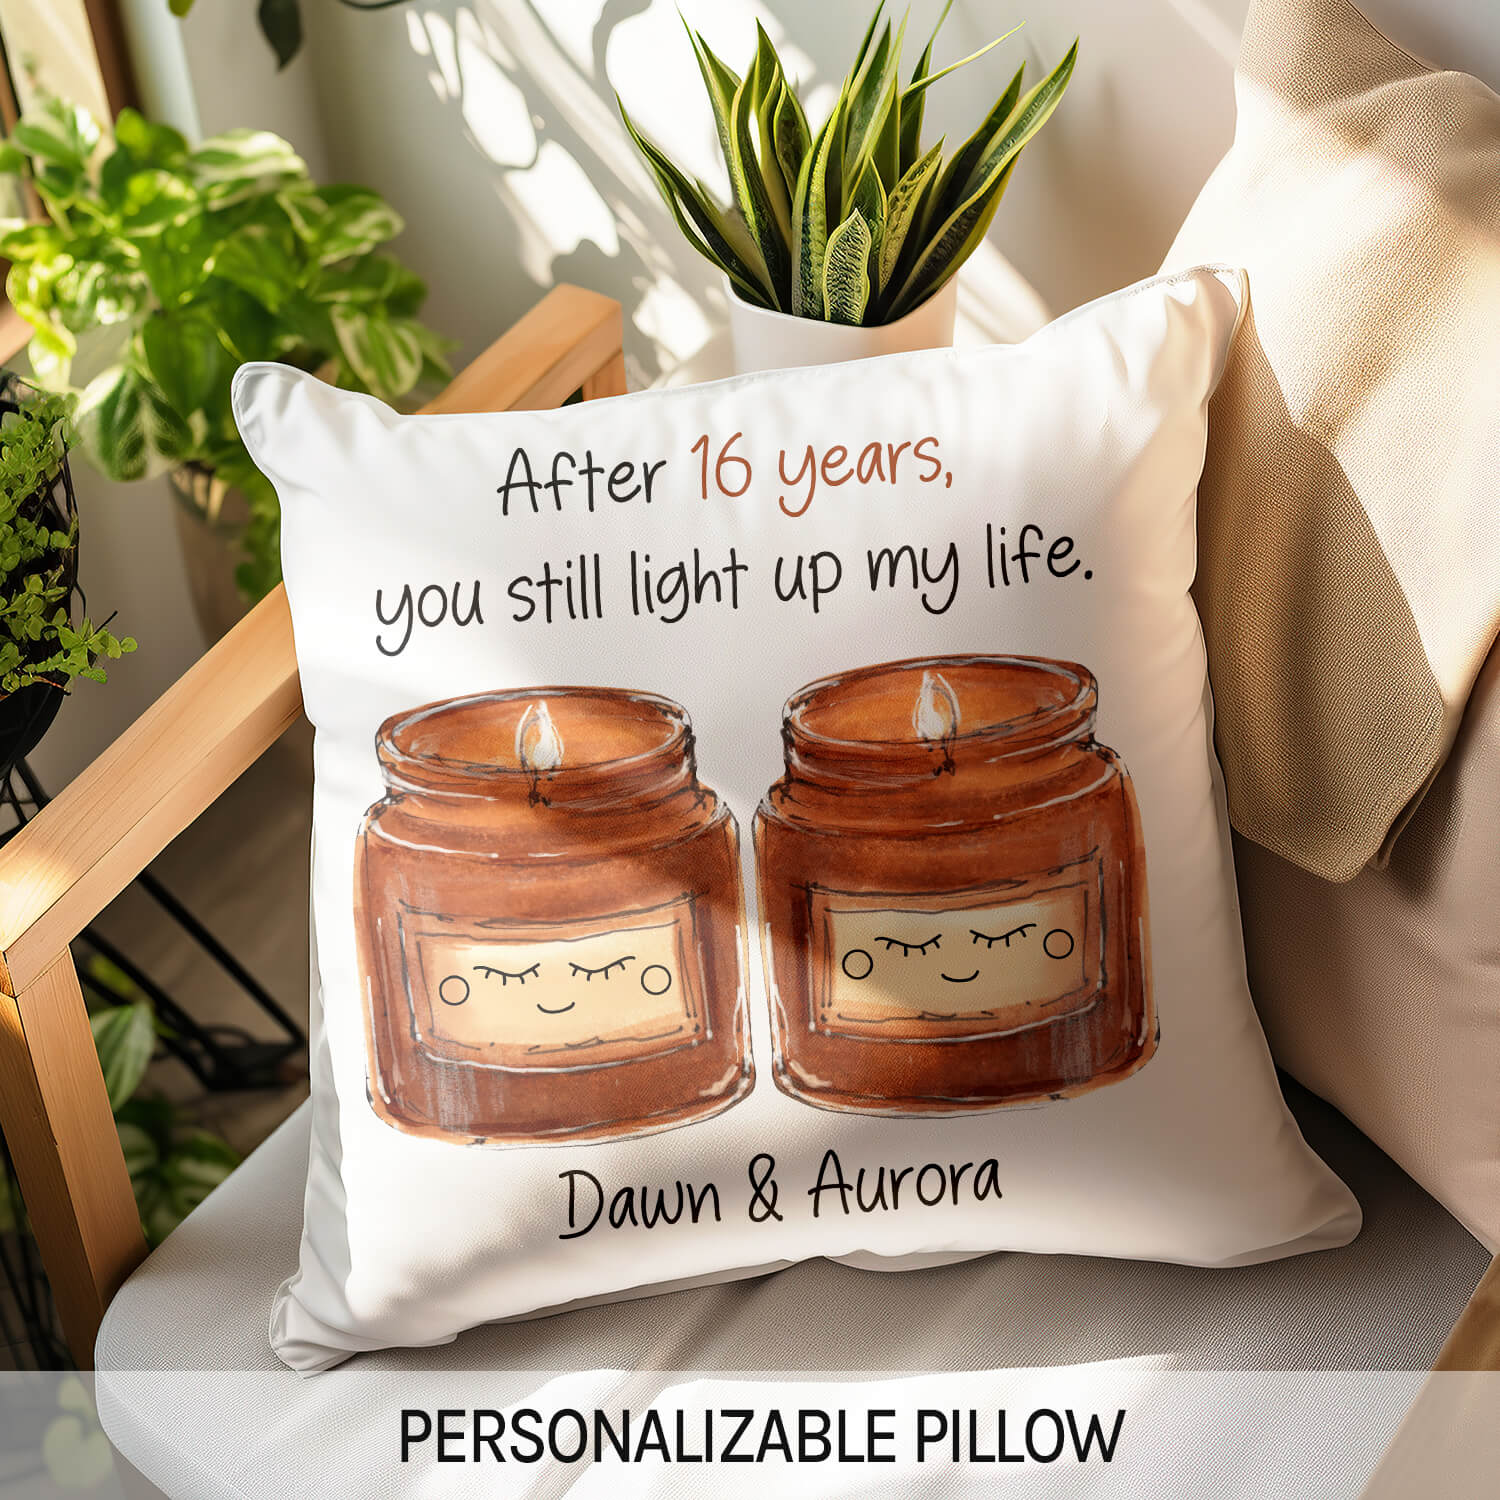 You Still Light Up My Life - Personalized 16 Year Anniversary gift For Husband or Wife - Custom Pillow - MyMindfulGifts